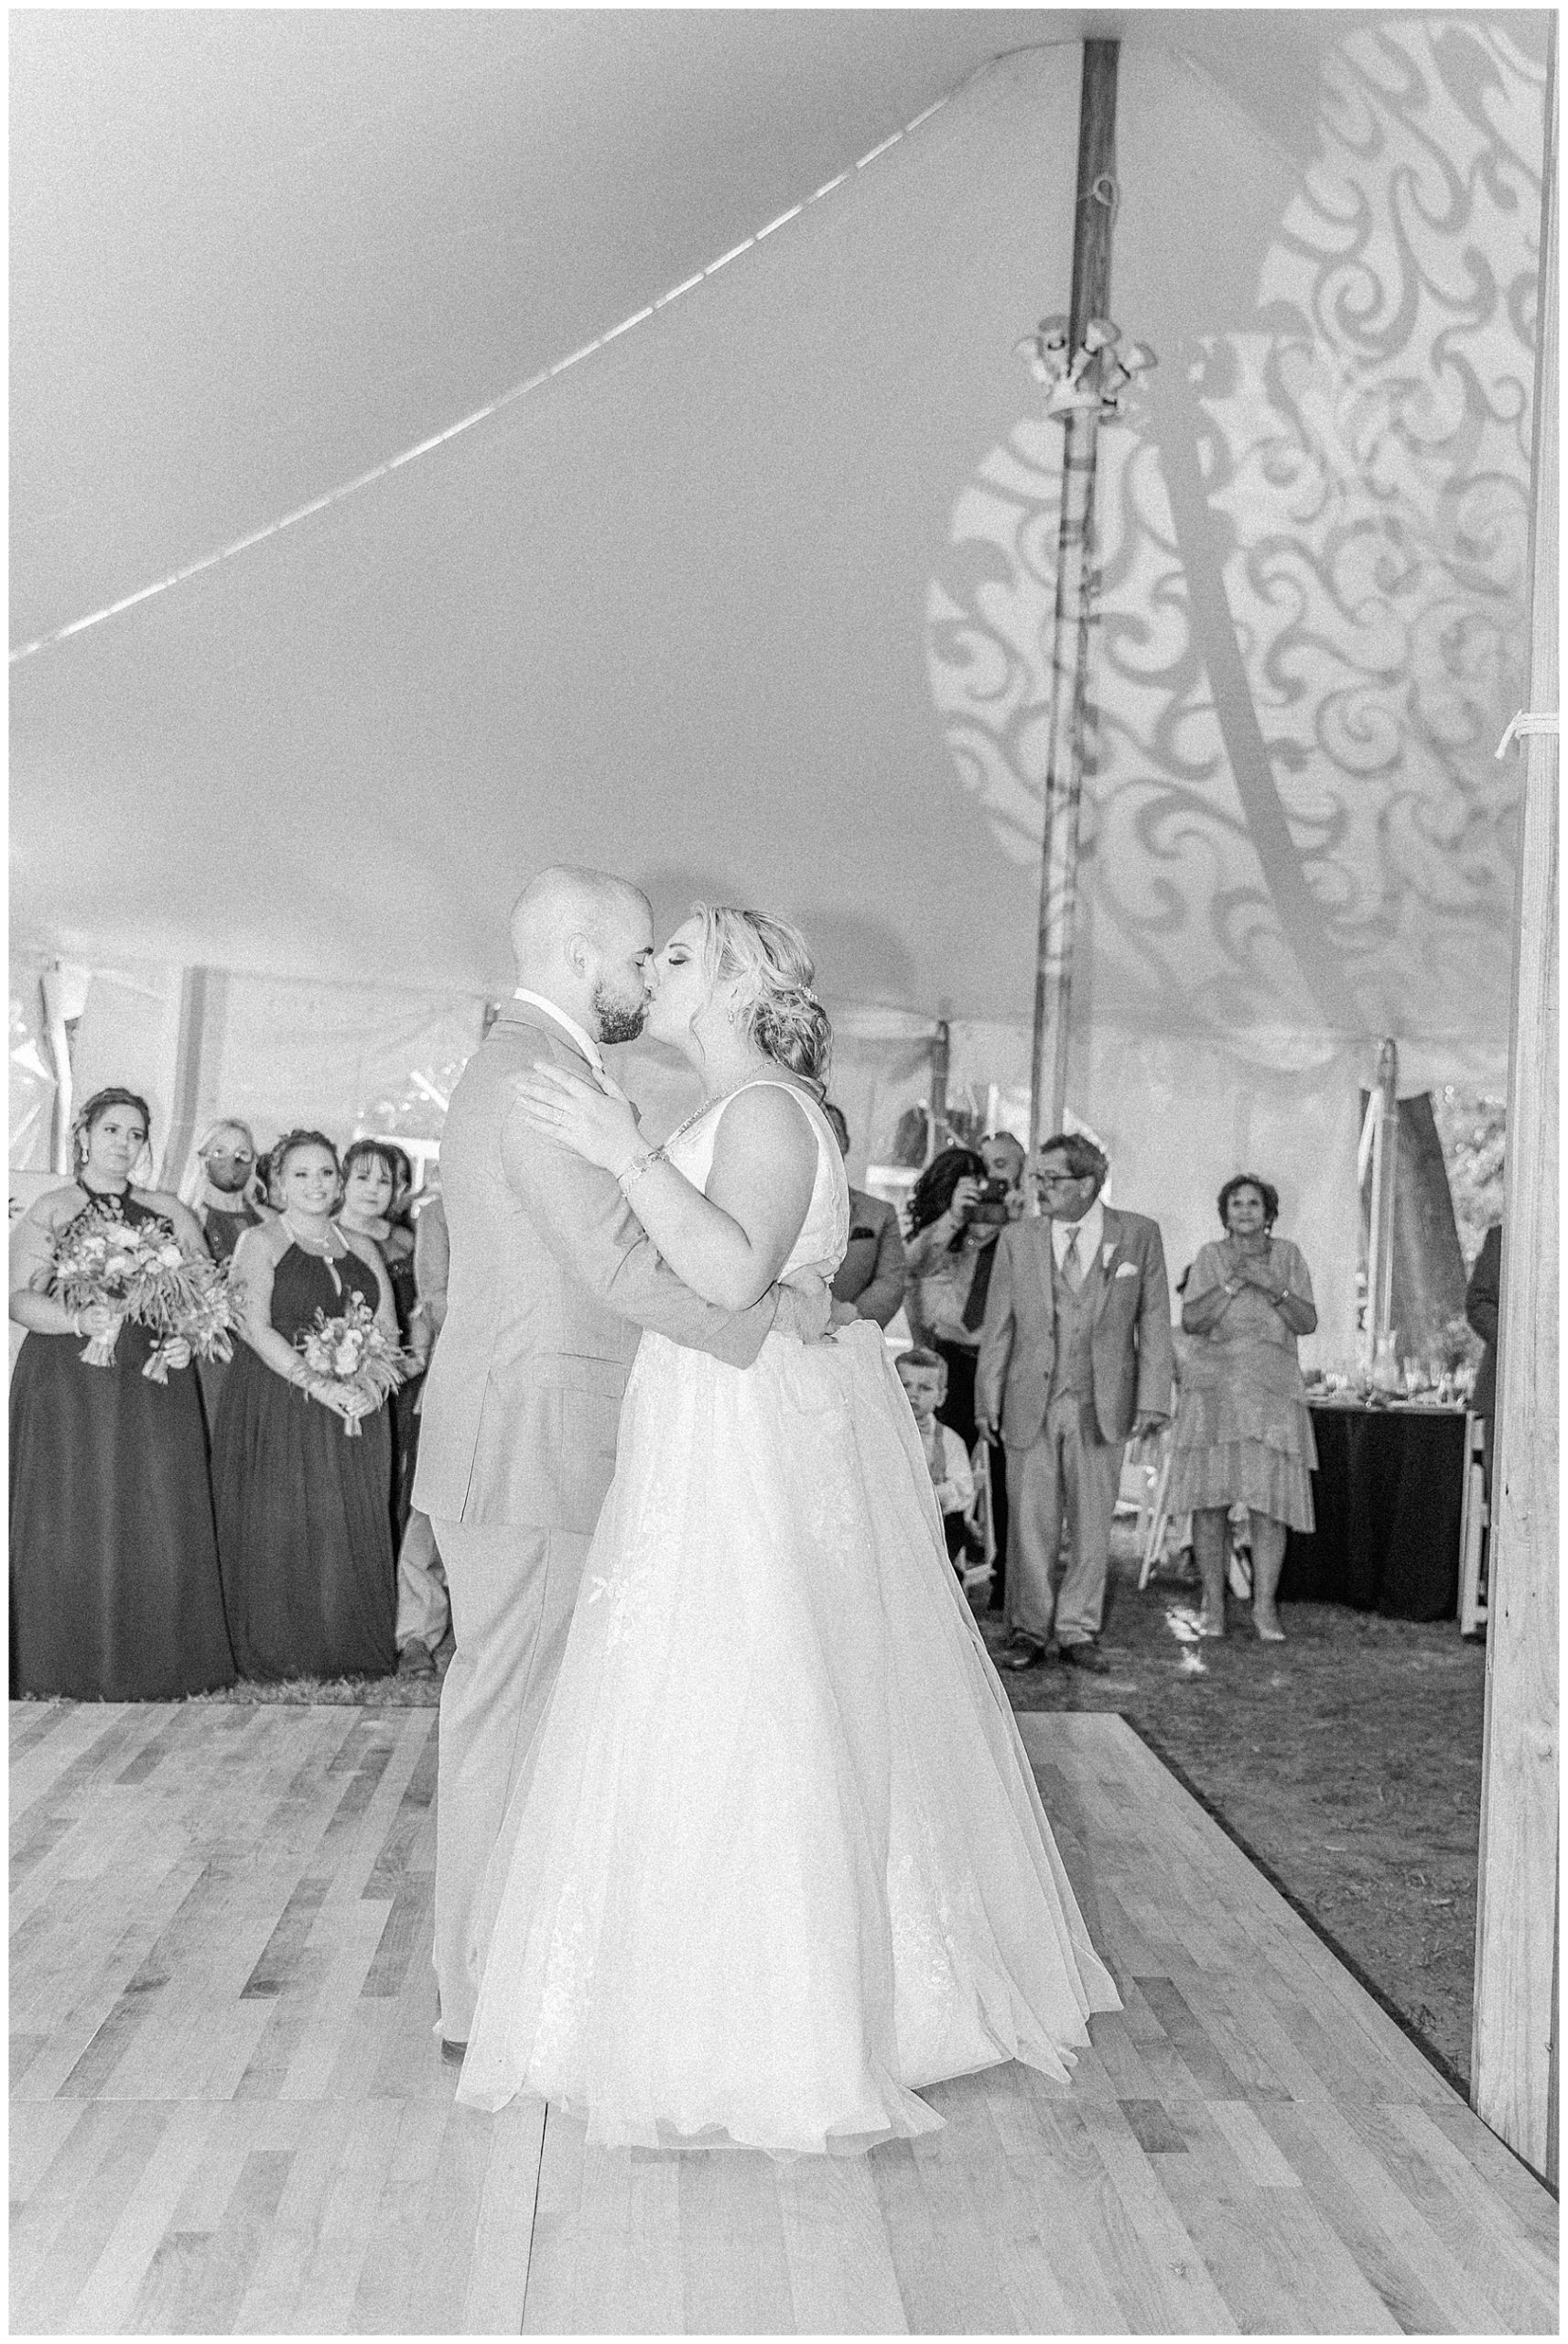 newlyweds kiss on the dance floor at wedding reception